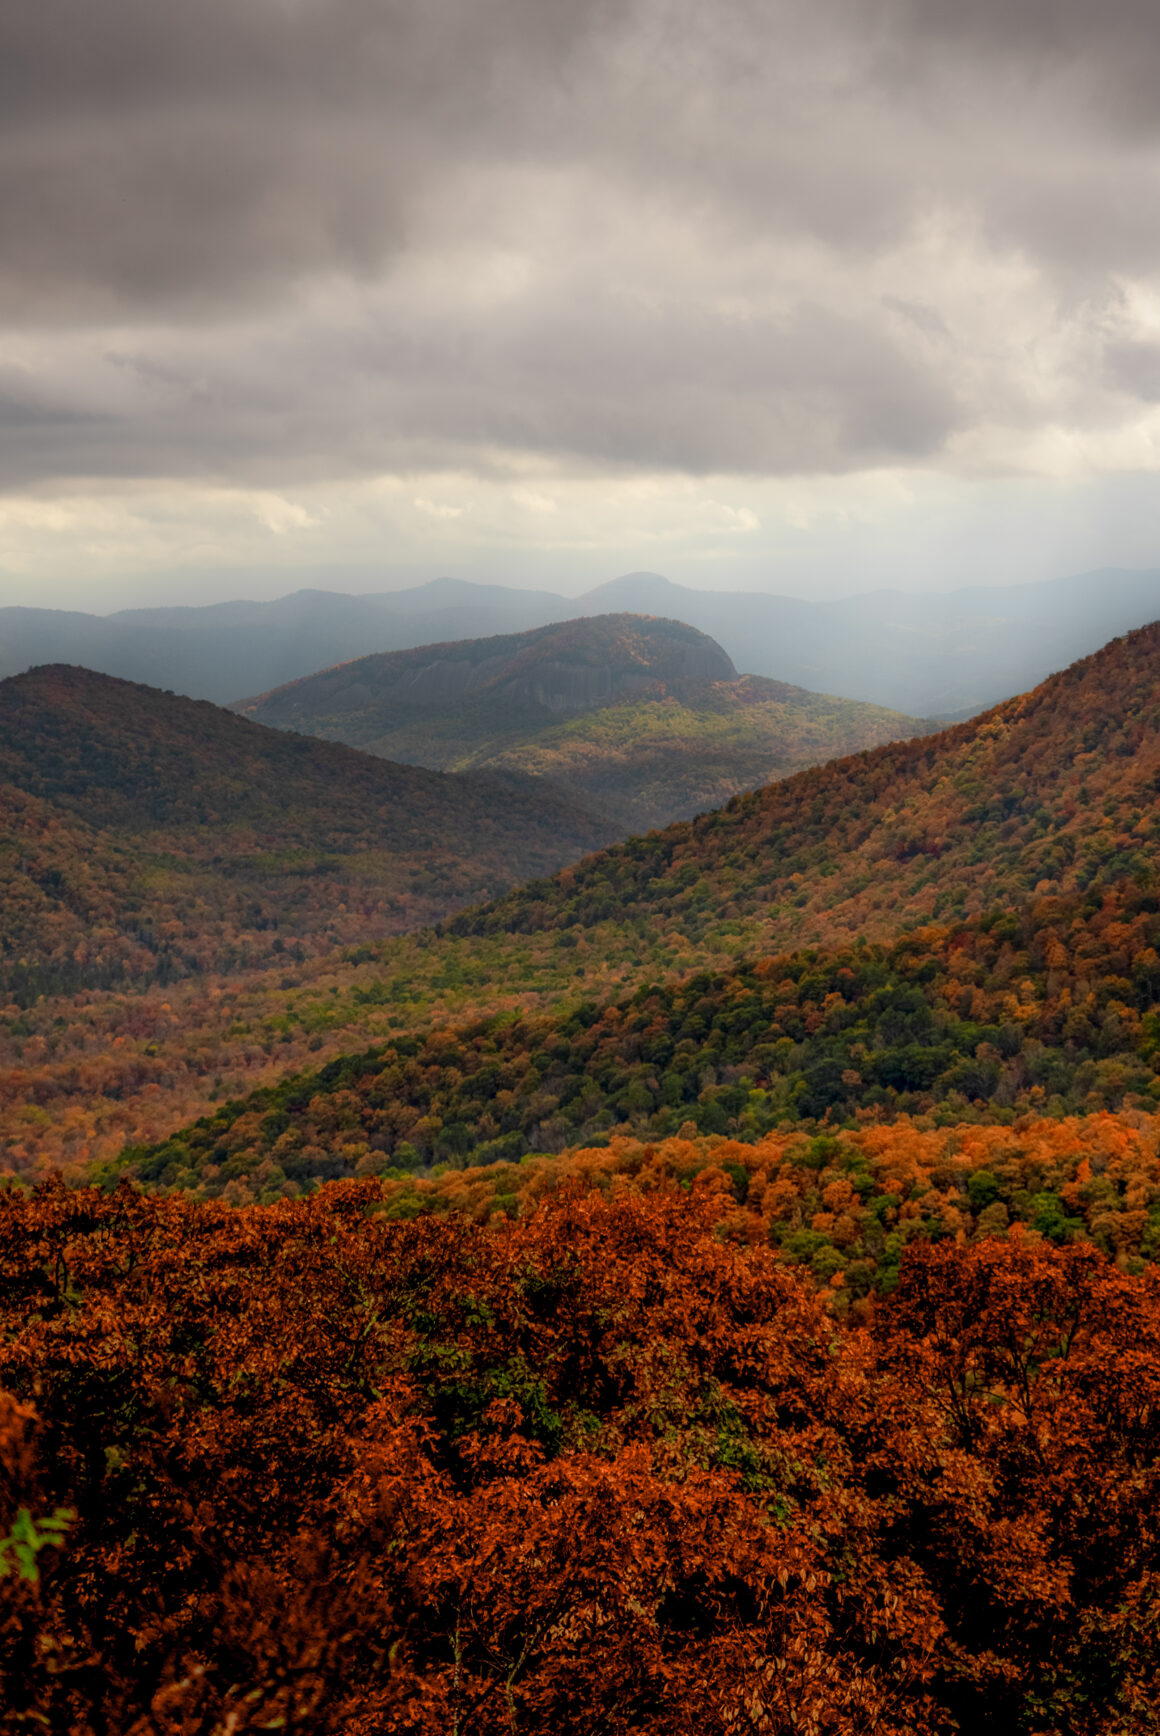 Fall on the Blue Ridge Parkway - Looking Glass Rock